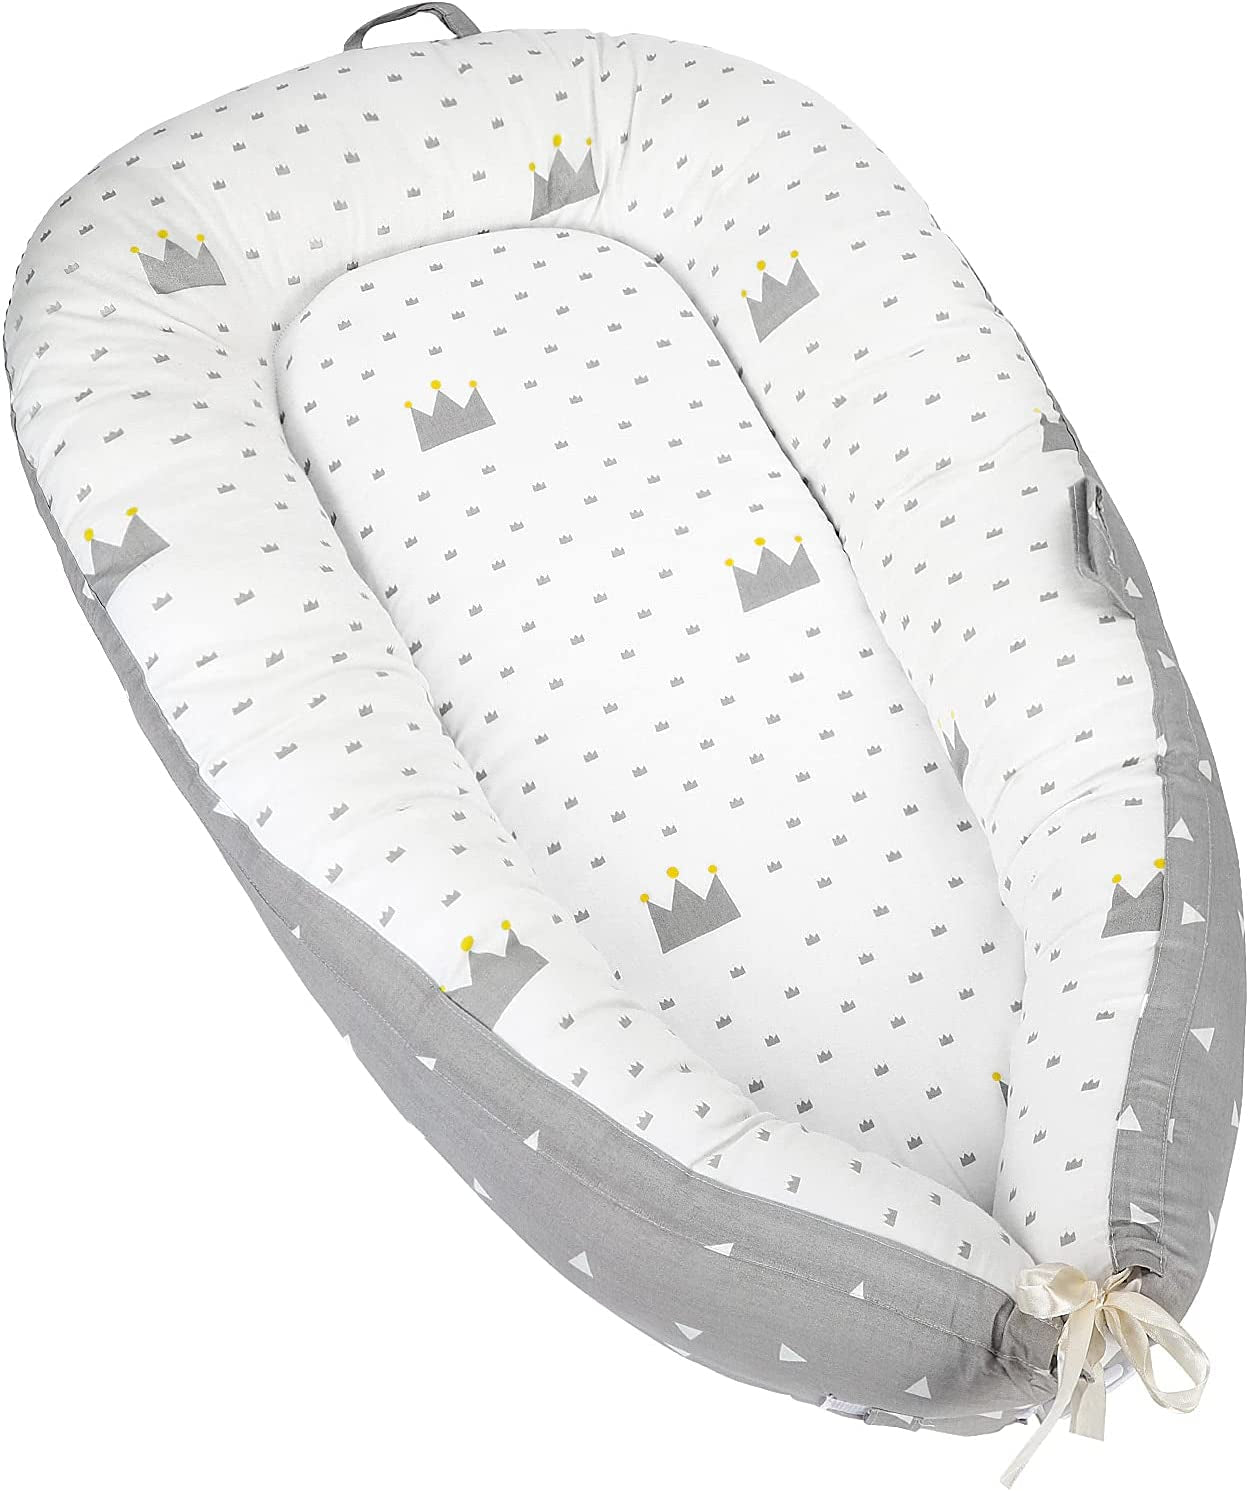 Luchild Multifunctional Baby Nest, Soft Sleeping Cribs Cuddle Pads, 100% Cotton Swaddling Wrap for Newborn & Babies (Planet)